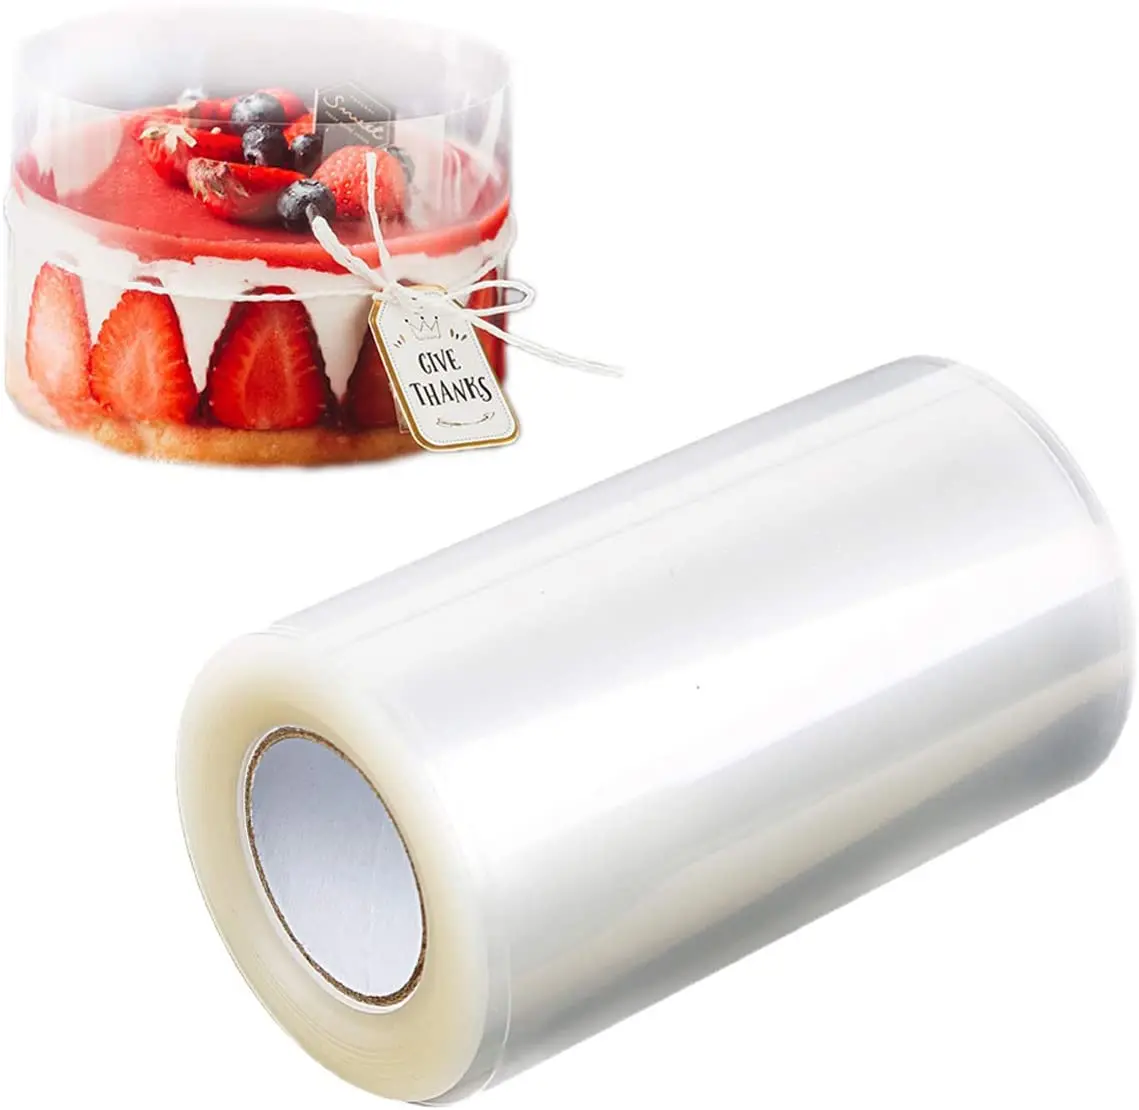 Acetate Cake Collar Clear Acetate Roll For Baking, Mousse Cake